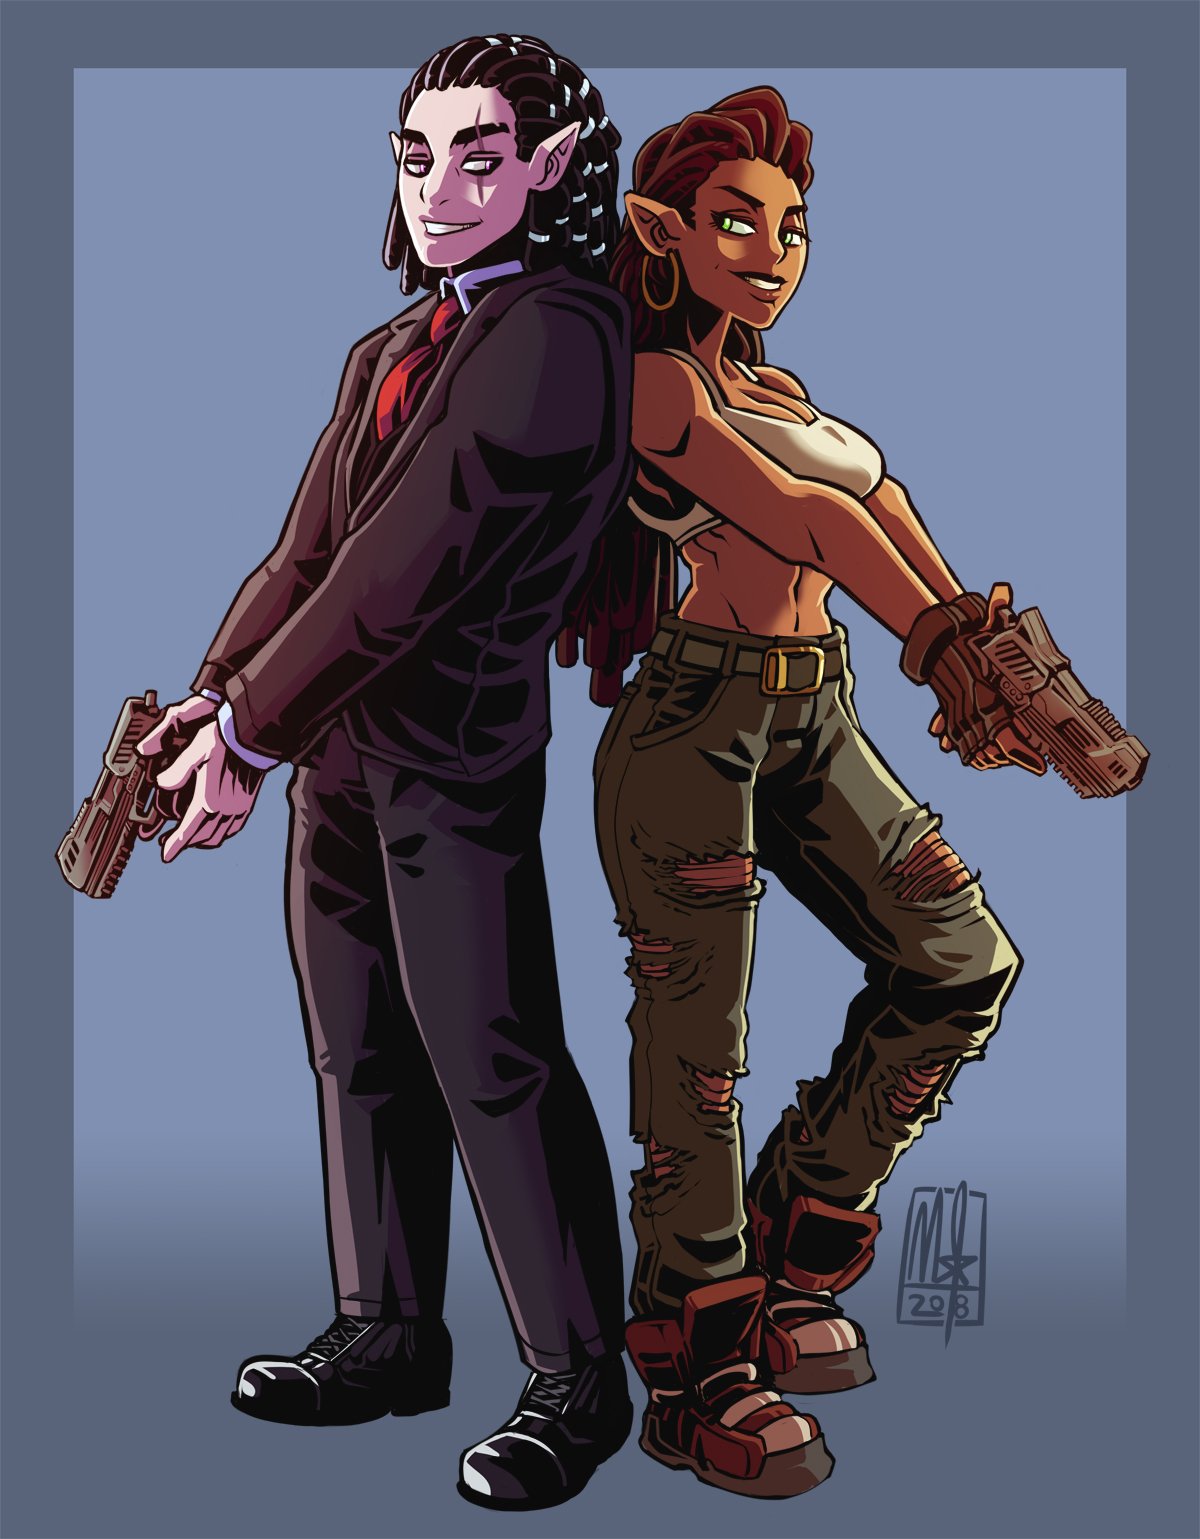 Max Gibson on X: Commission of Shadowrunners Alexis and Ryel #Shadowrun  #elf #orc #suit #pistol #cyberpunk #commission  / X